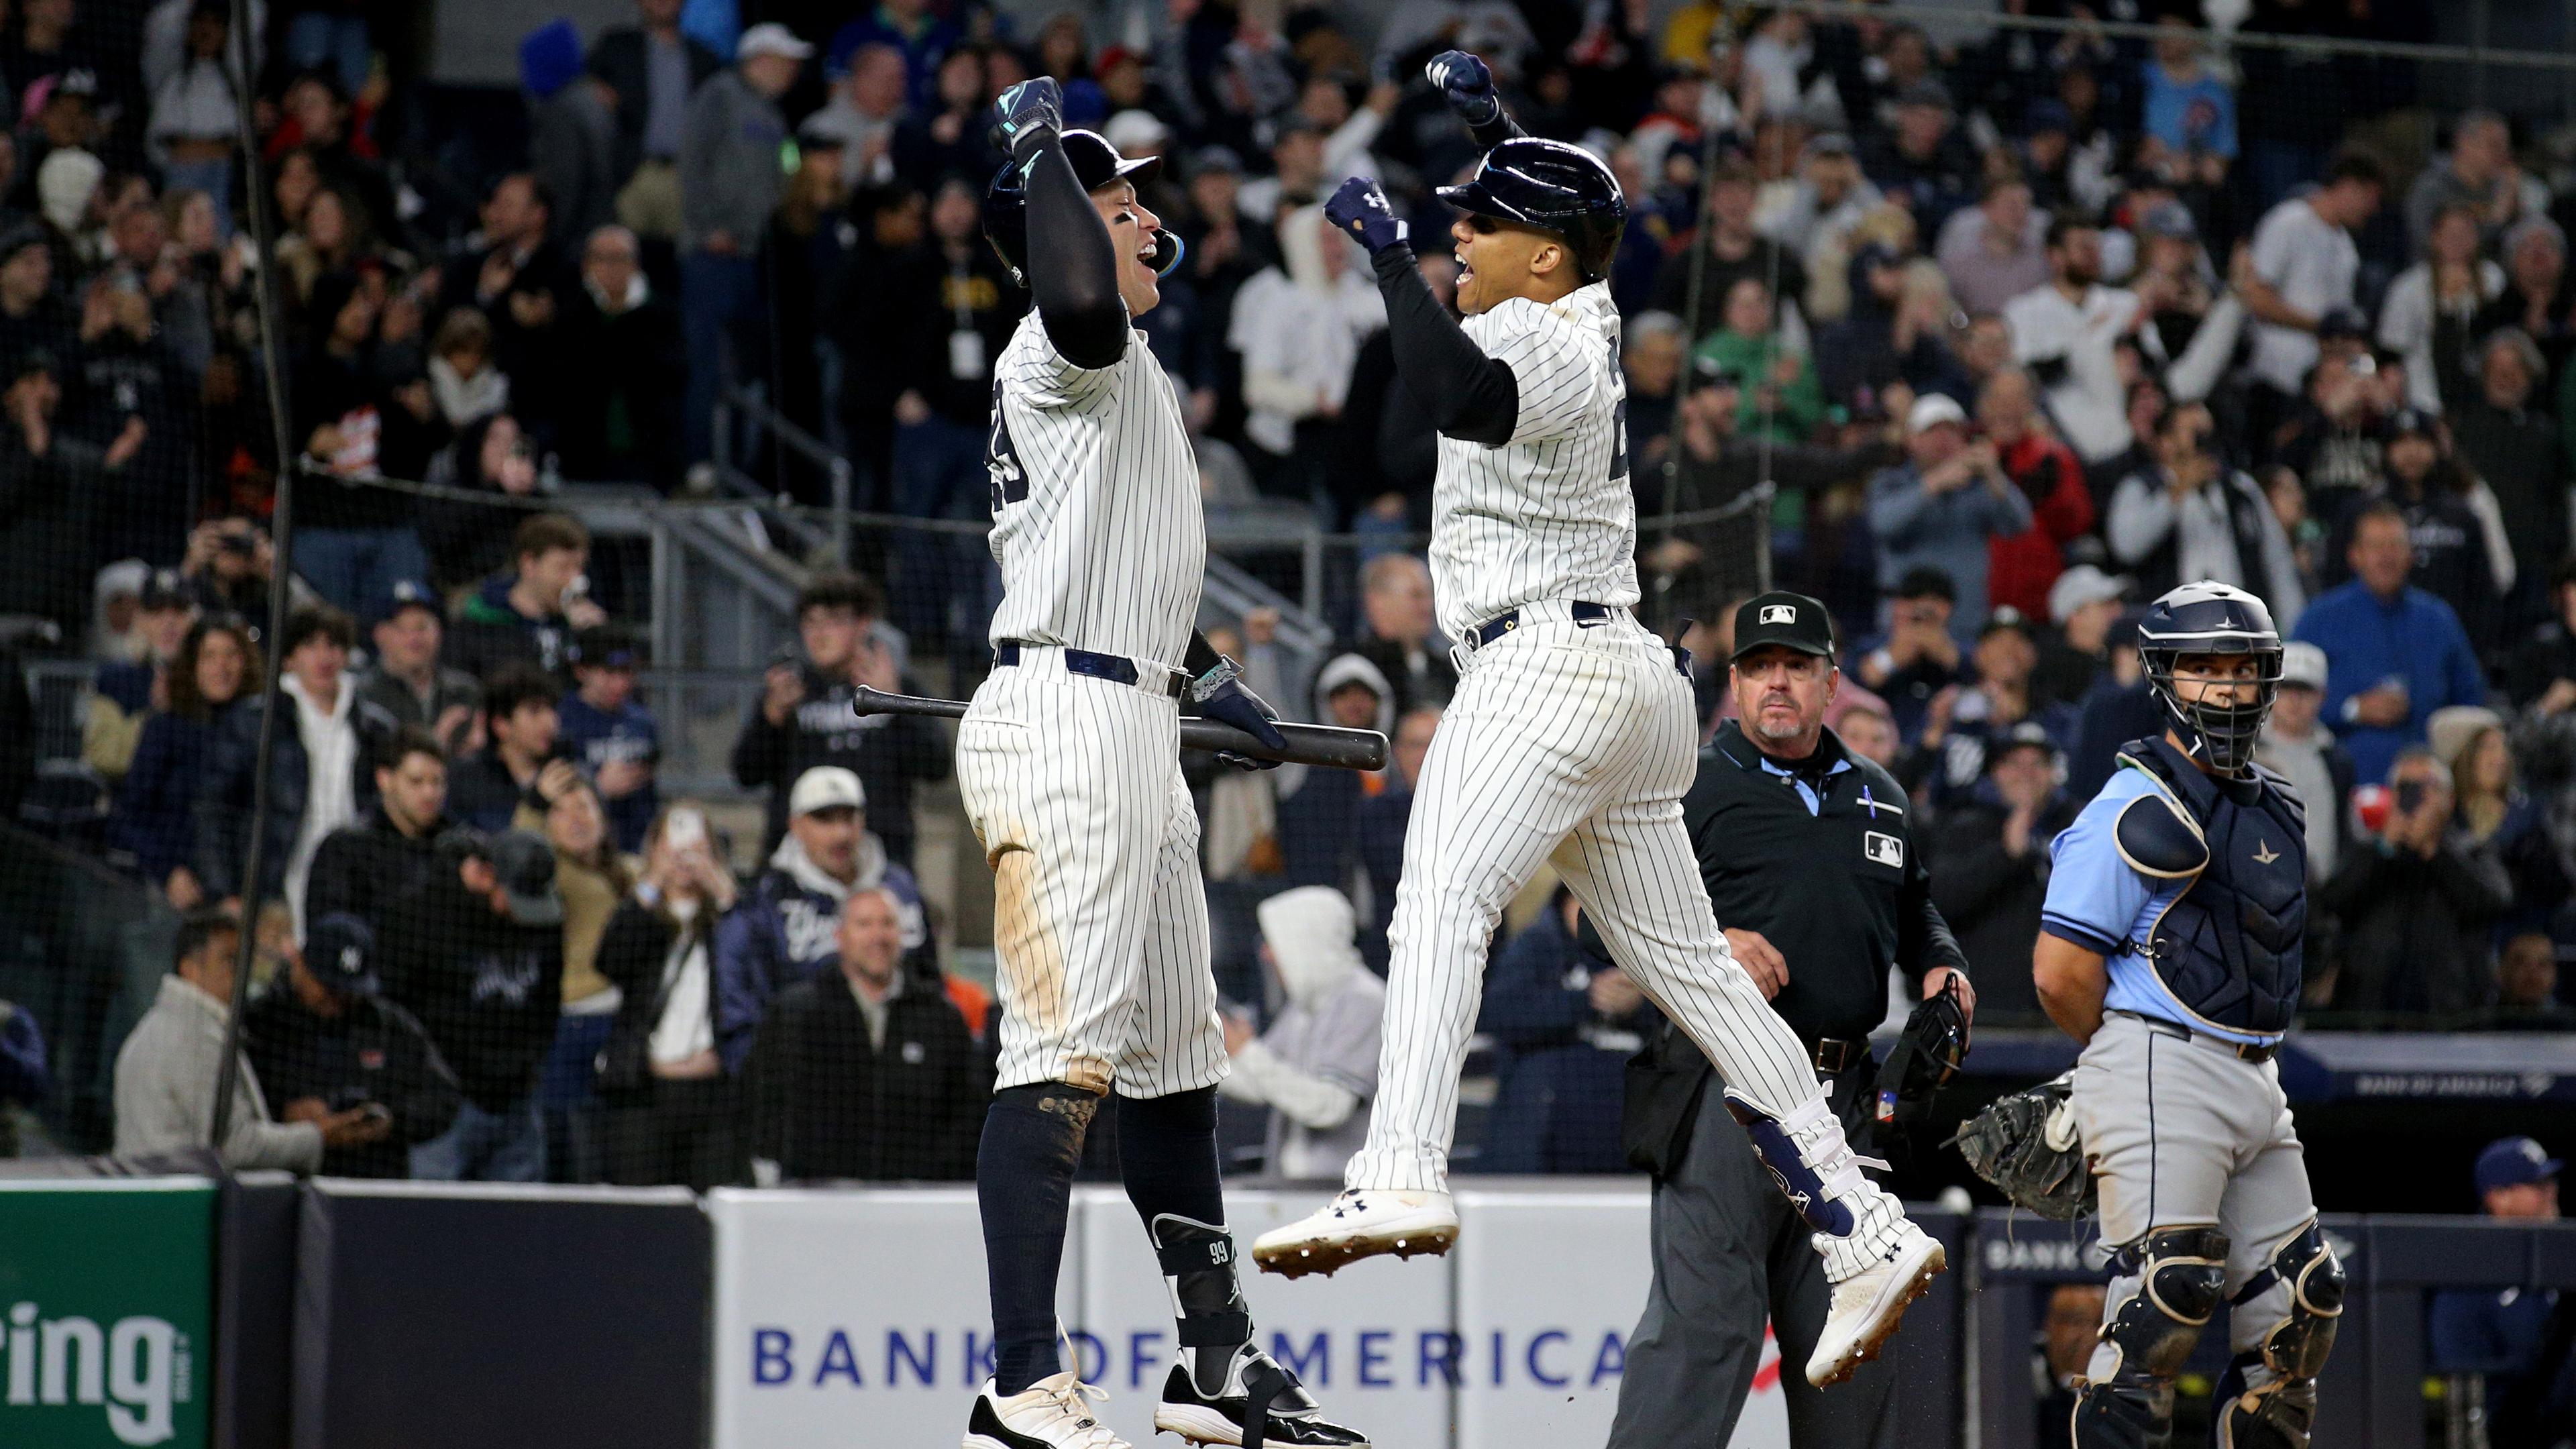 New York Yankees right fielder Juan Soto (22) celebrates with center fielder Aaron Judge (99) after hitting a three run home run against the Tampa Bay Rays during the seventh inning at Yankee Stadium. / Brad Penner-USA TODAY Sports